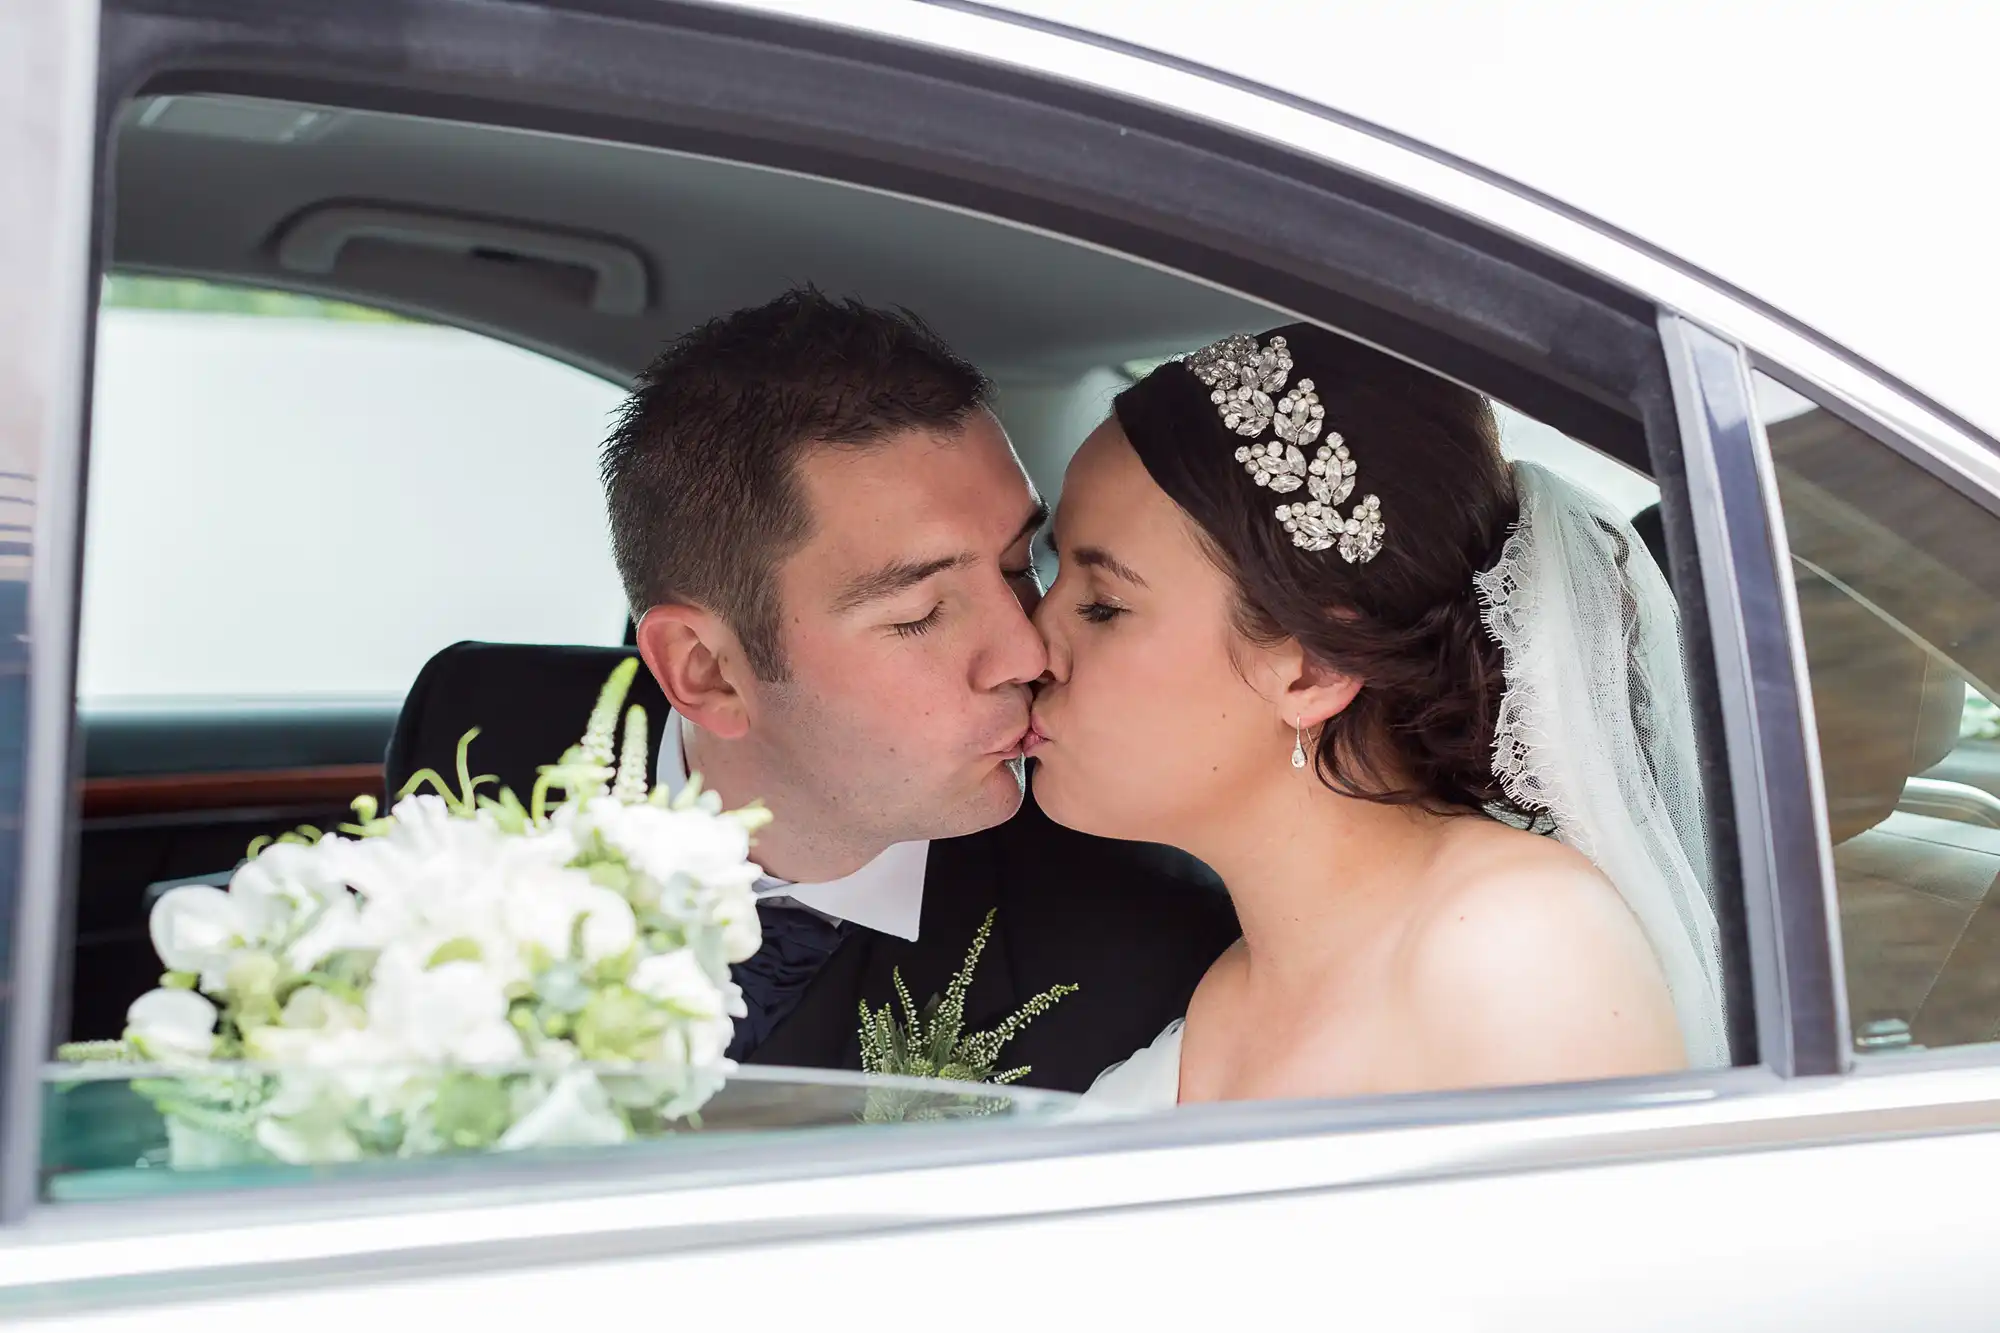 A newlywed couple kissing inside a car, with the bride holding a bouquet and wearing a tiara and veil.